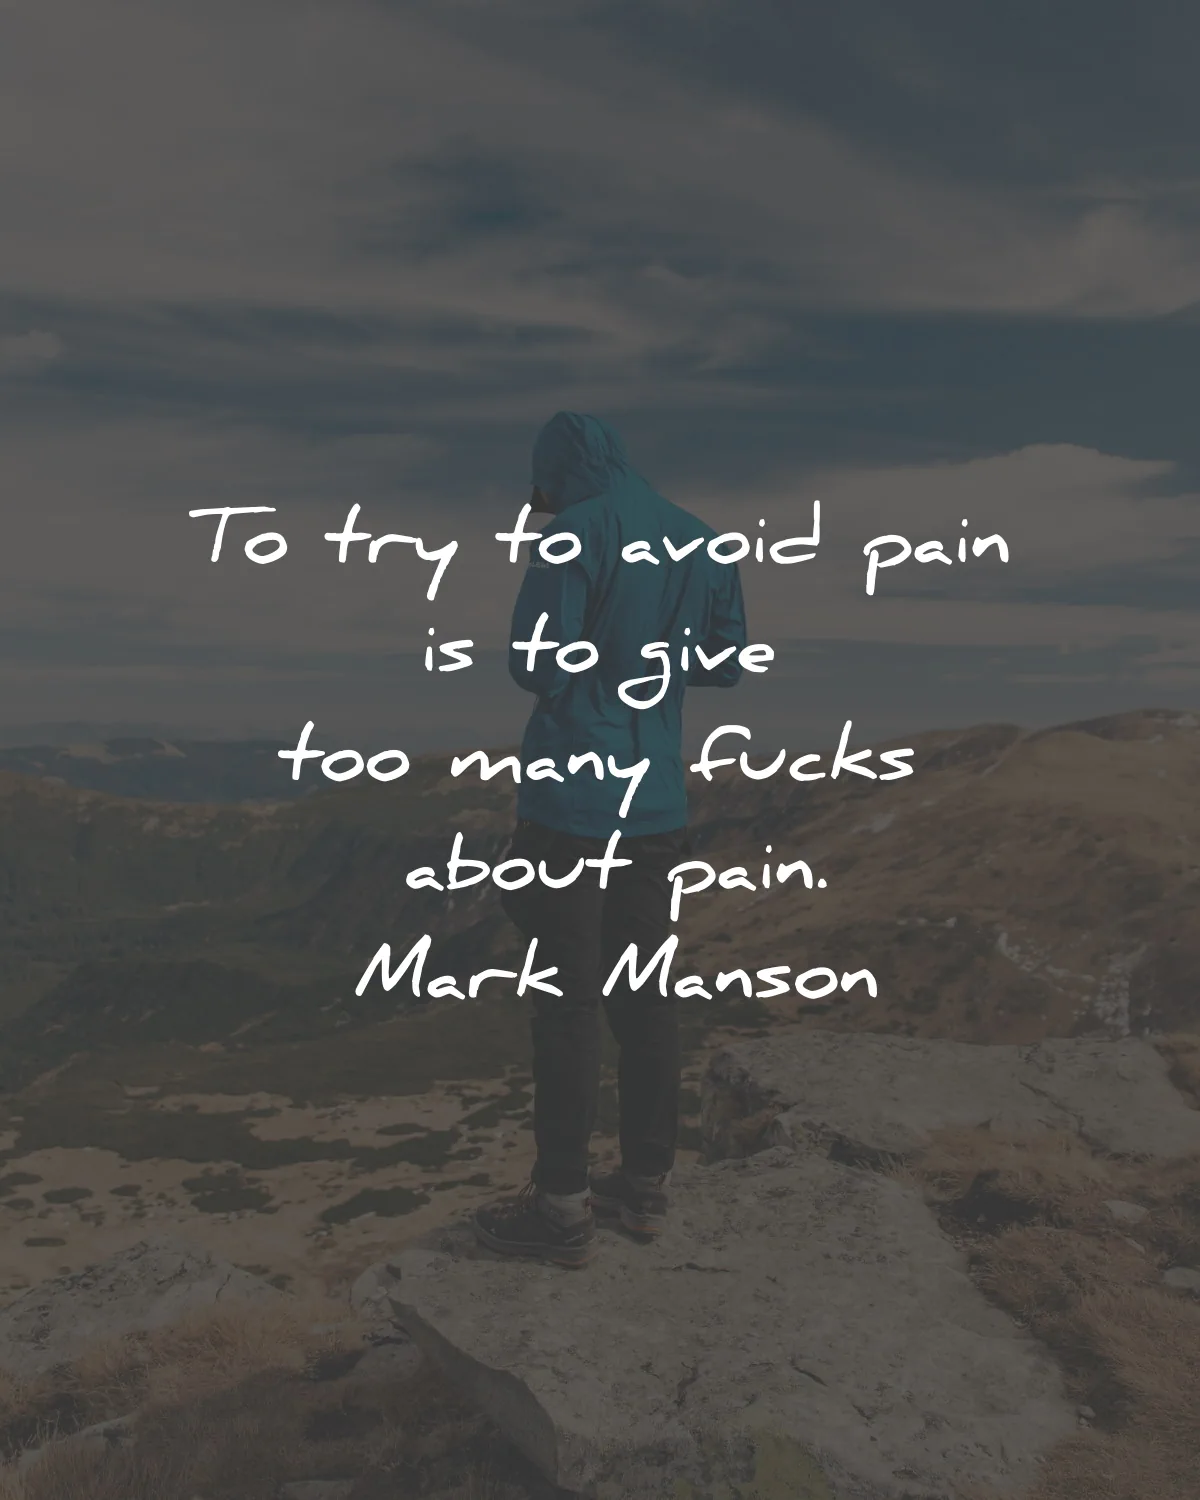 the subtle art of not giving of fck quotes mark manson try avoid pain wisdom